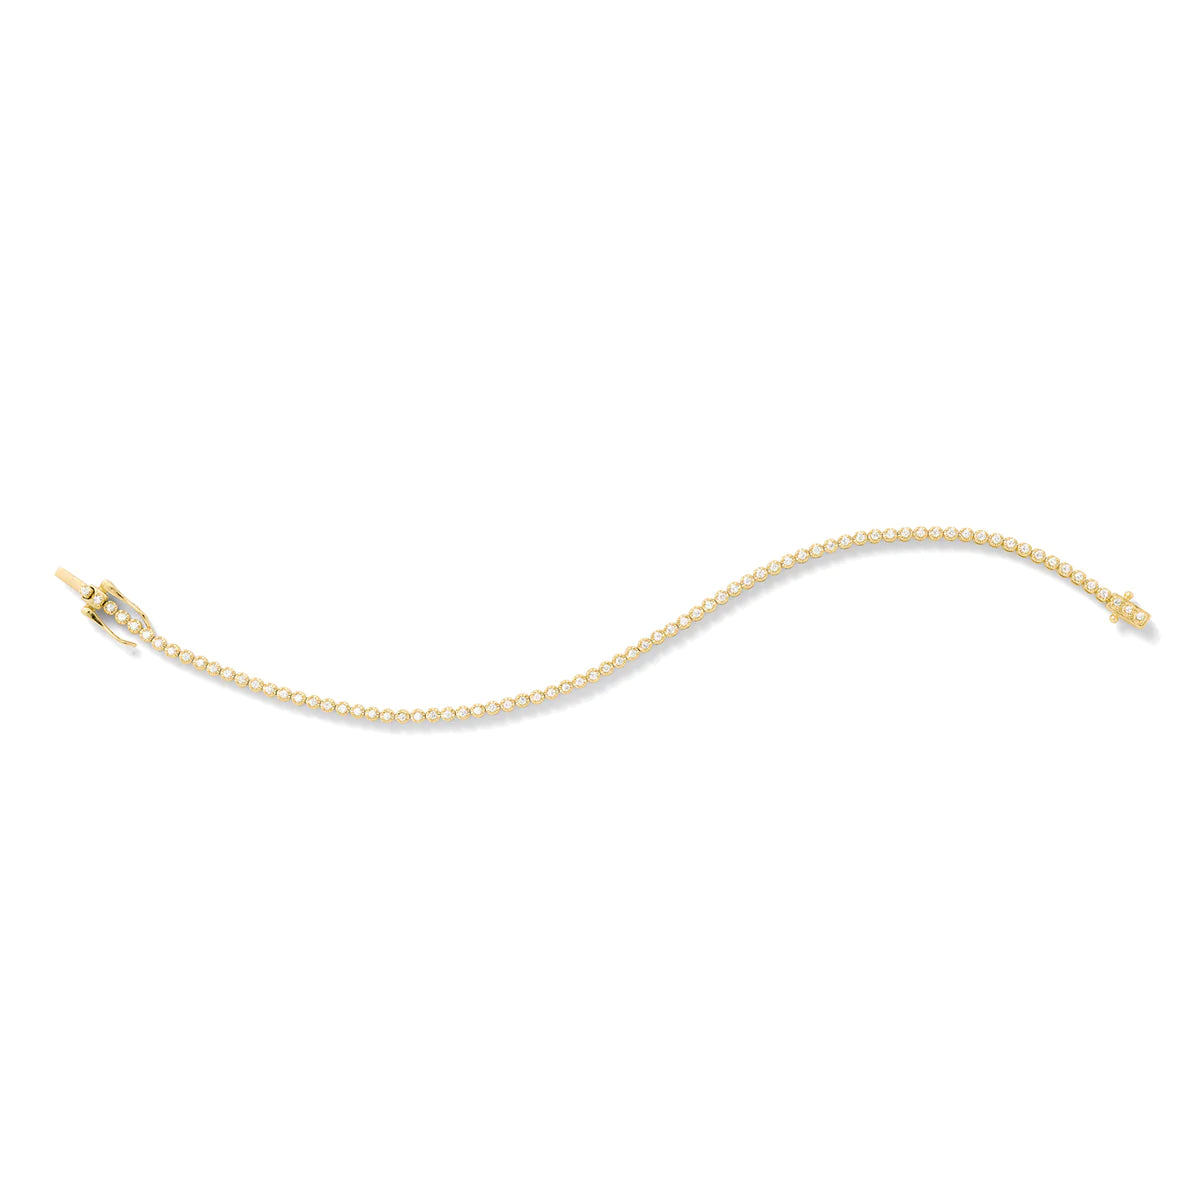 Load image into Gallery viewer, Eva Fehren 1mm Line Bracelet in 18K Yellow Gold with White Diamonds
